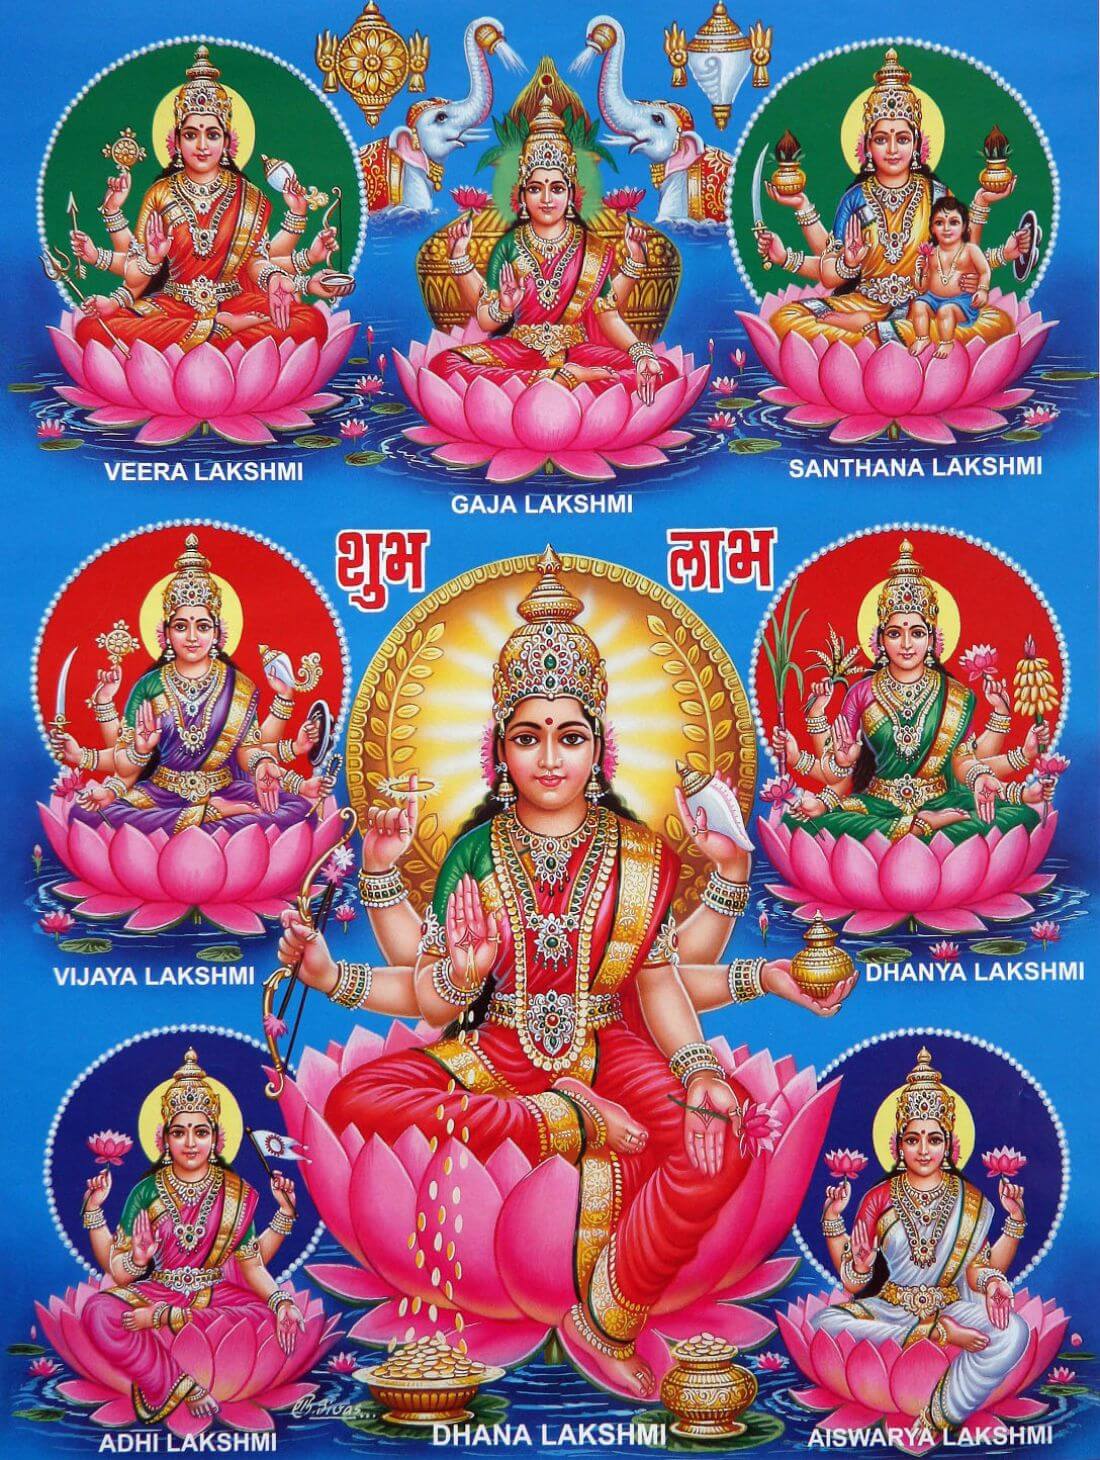 Ashta Lakshmi - Indian Religious Art Poster by James Britto | Buy Posters, Frames, Canvas & Digital Art Prints | Small, Compact, Medium and Large Variants